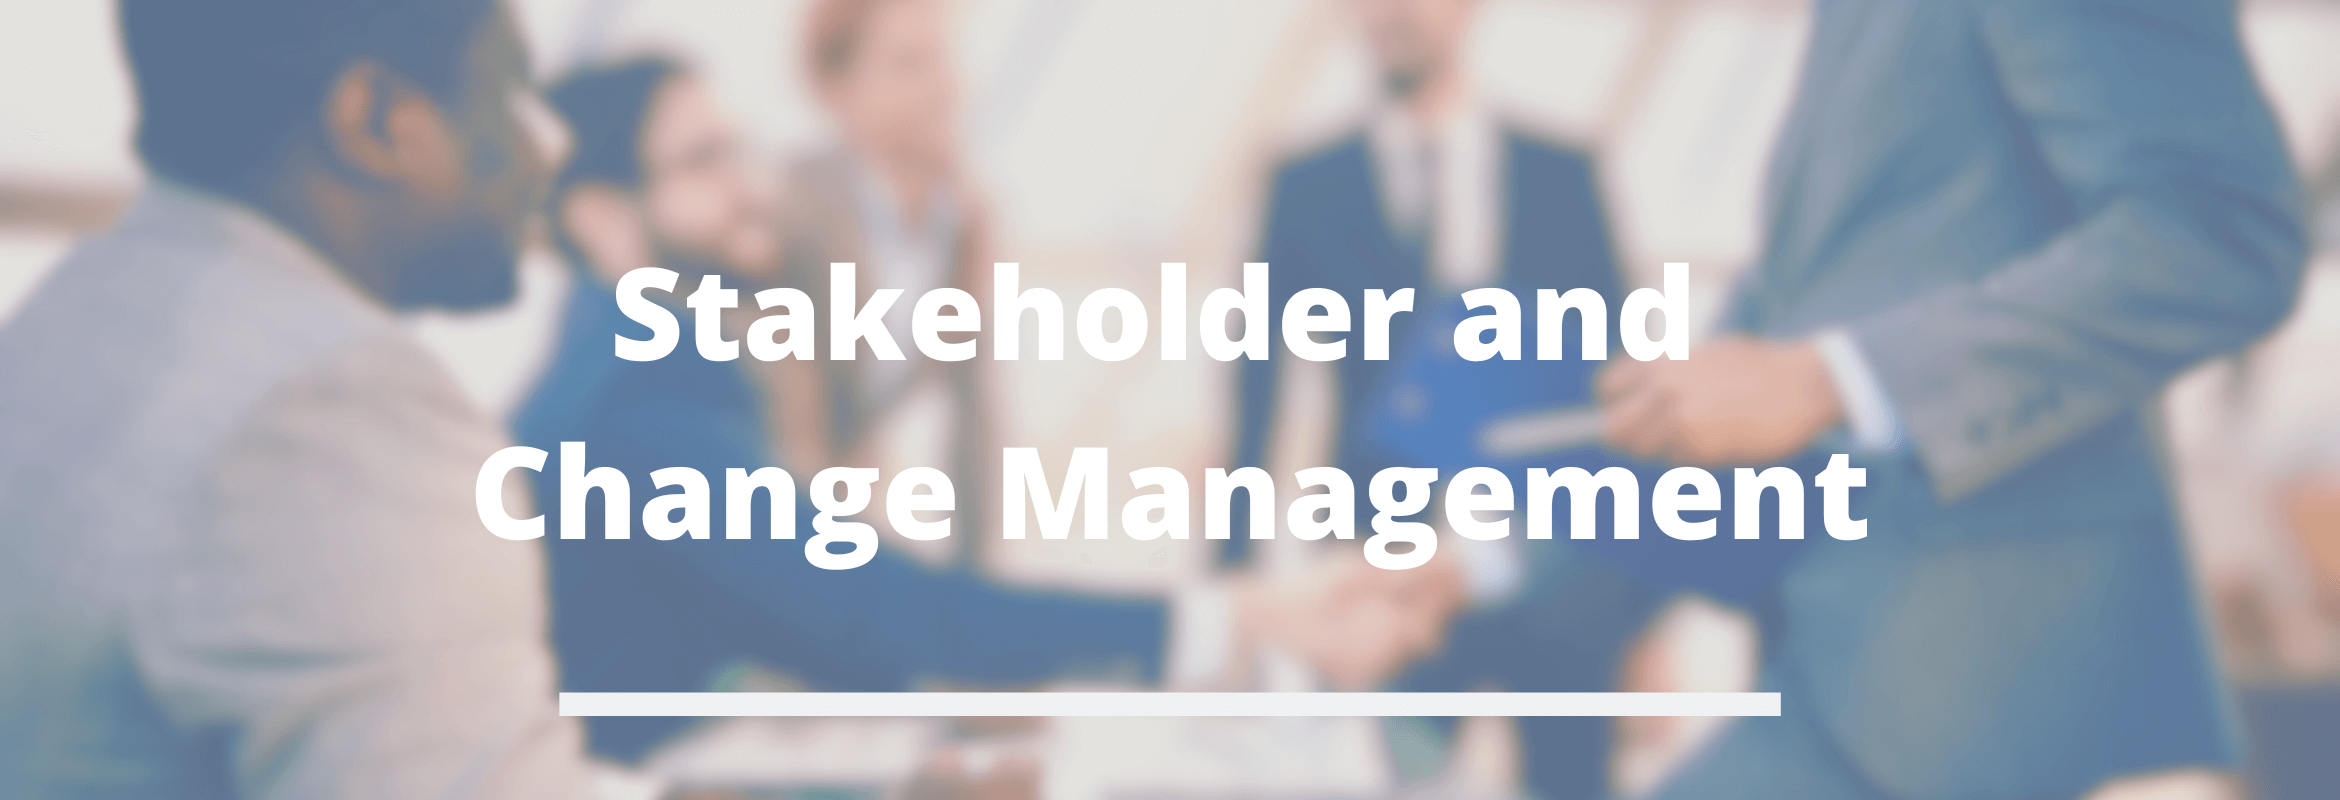 Image of Stakeholder Management 